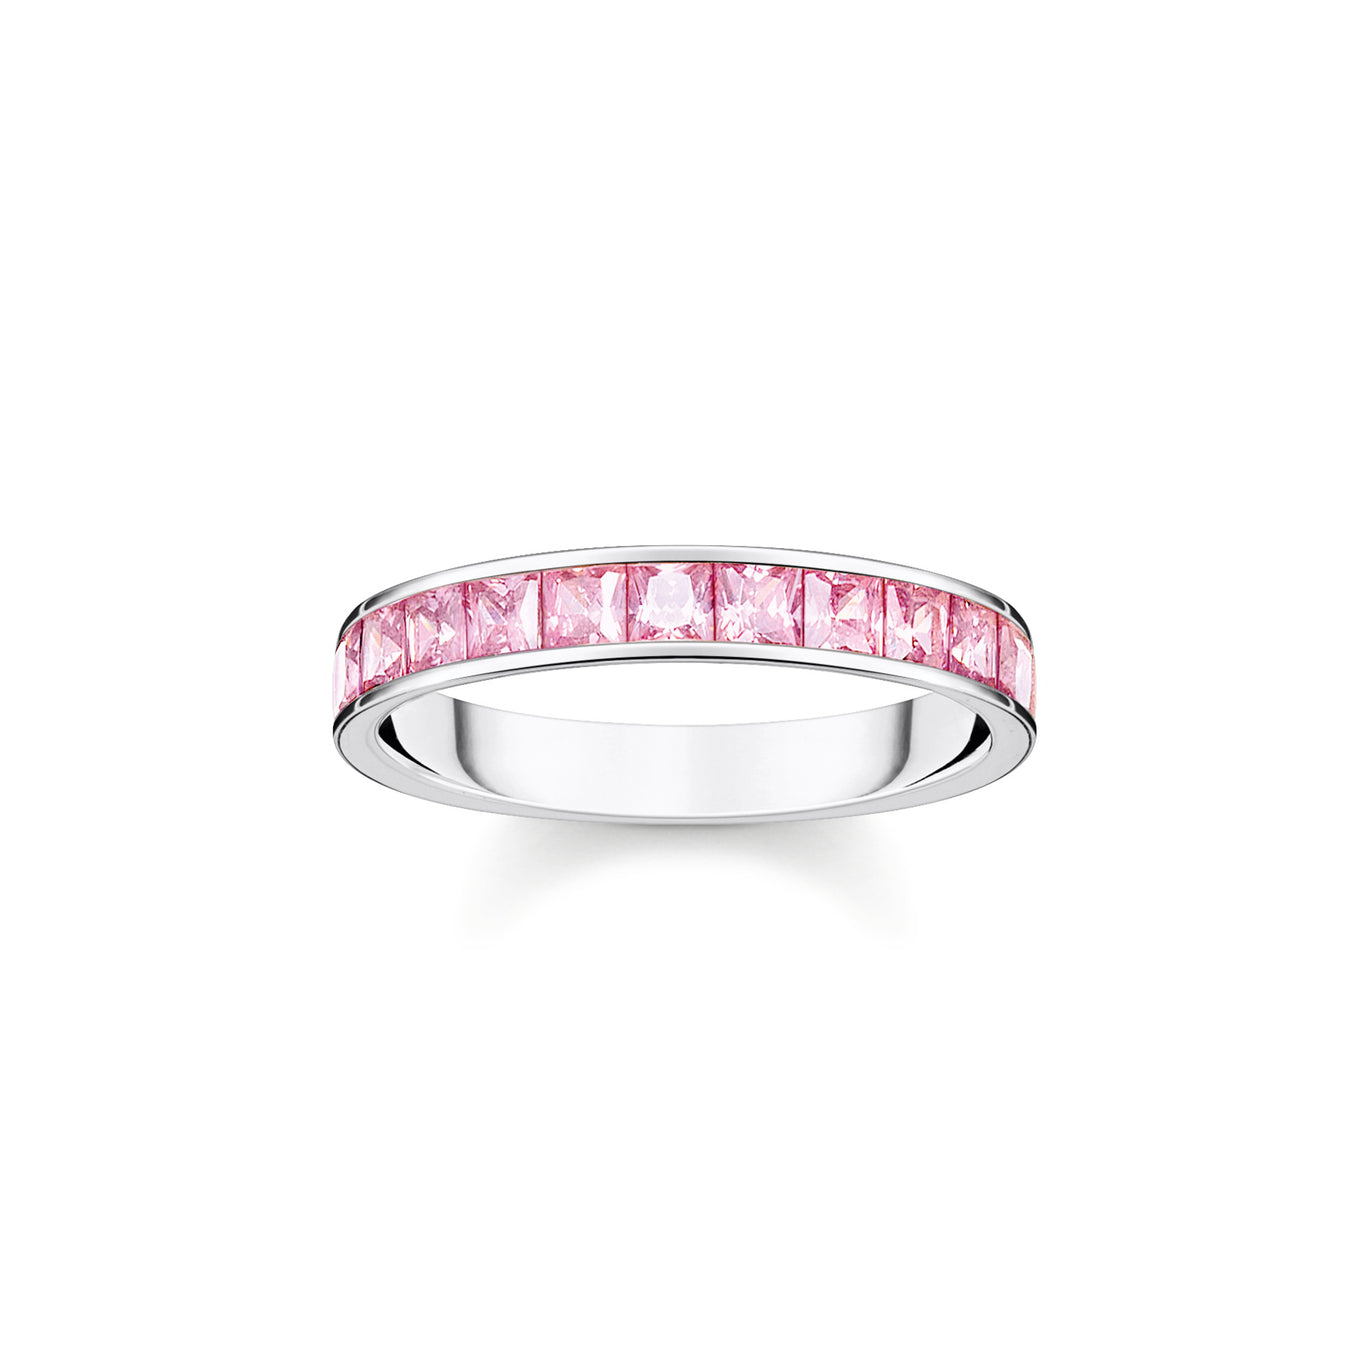 Thomas Sabo Silver Ring with Pink Stones